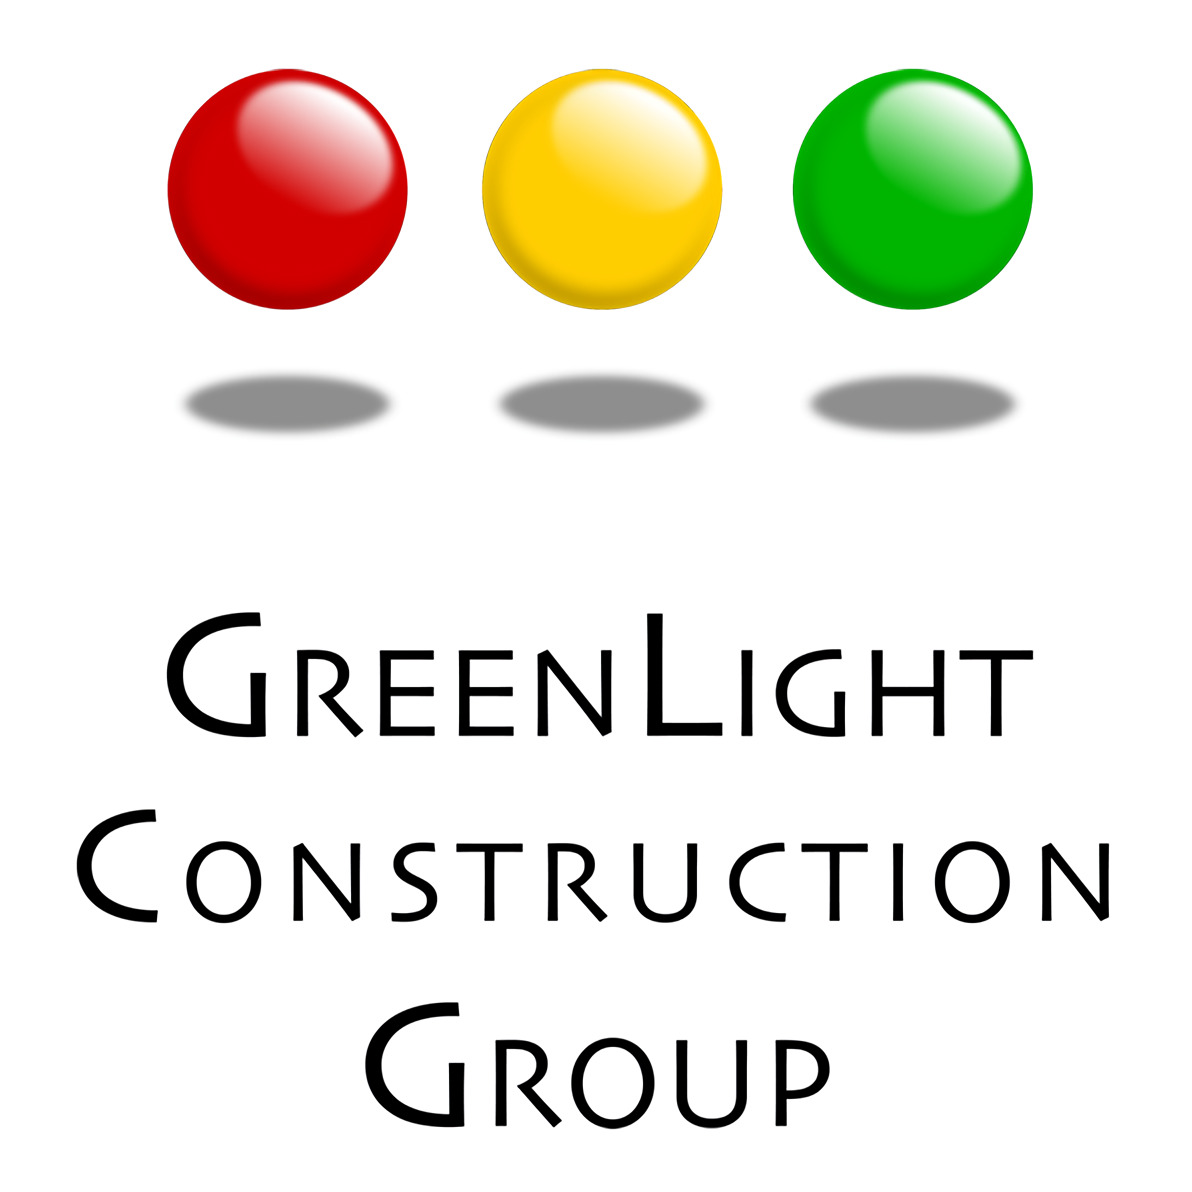 Greenlight Construction Group Shares What Makes It the Best Roofing Company